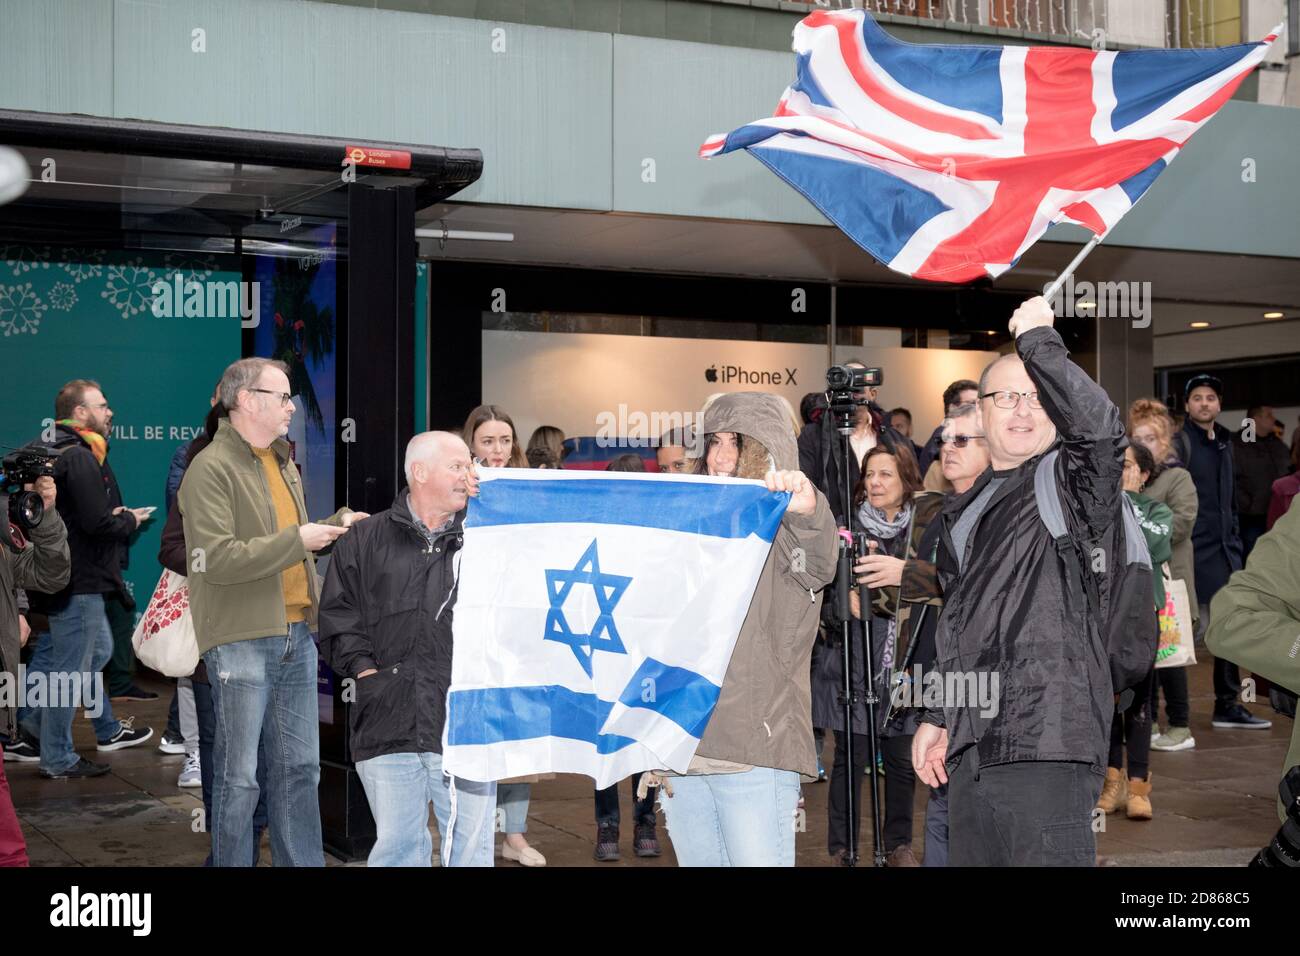 4th November 2017, London, United Kingdom:-Pro Israeli protesters counter demonstrate a pro Palestine rally in central London Stock Photo